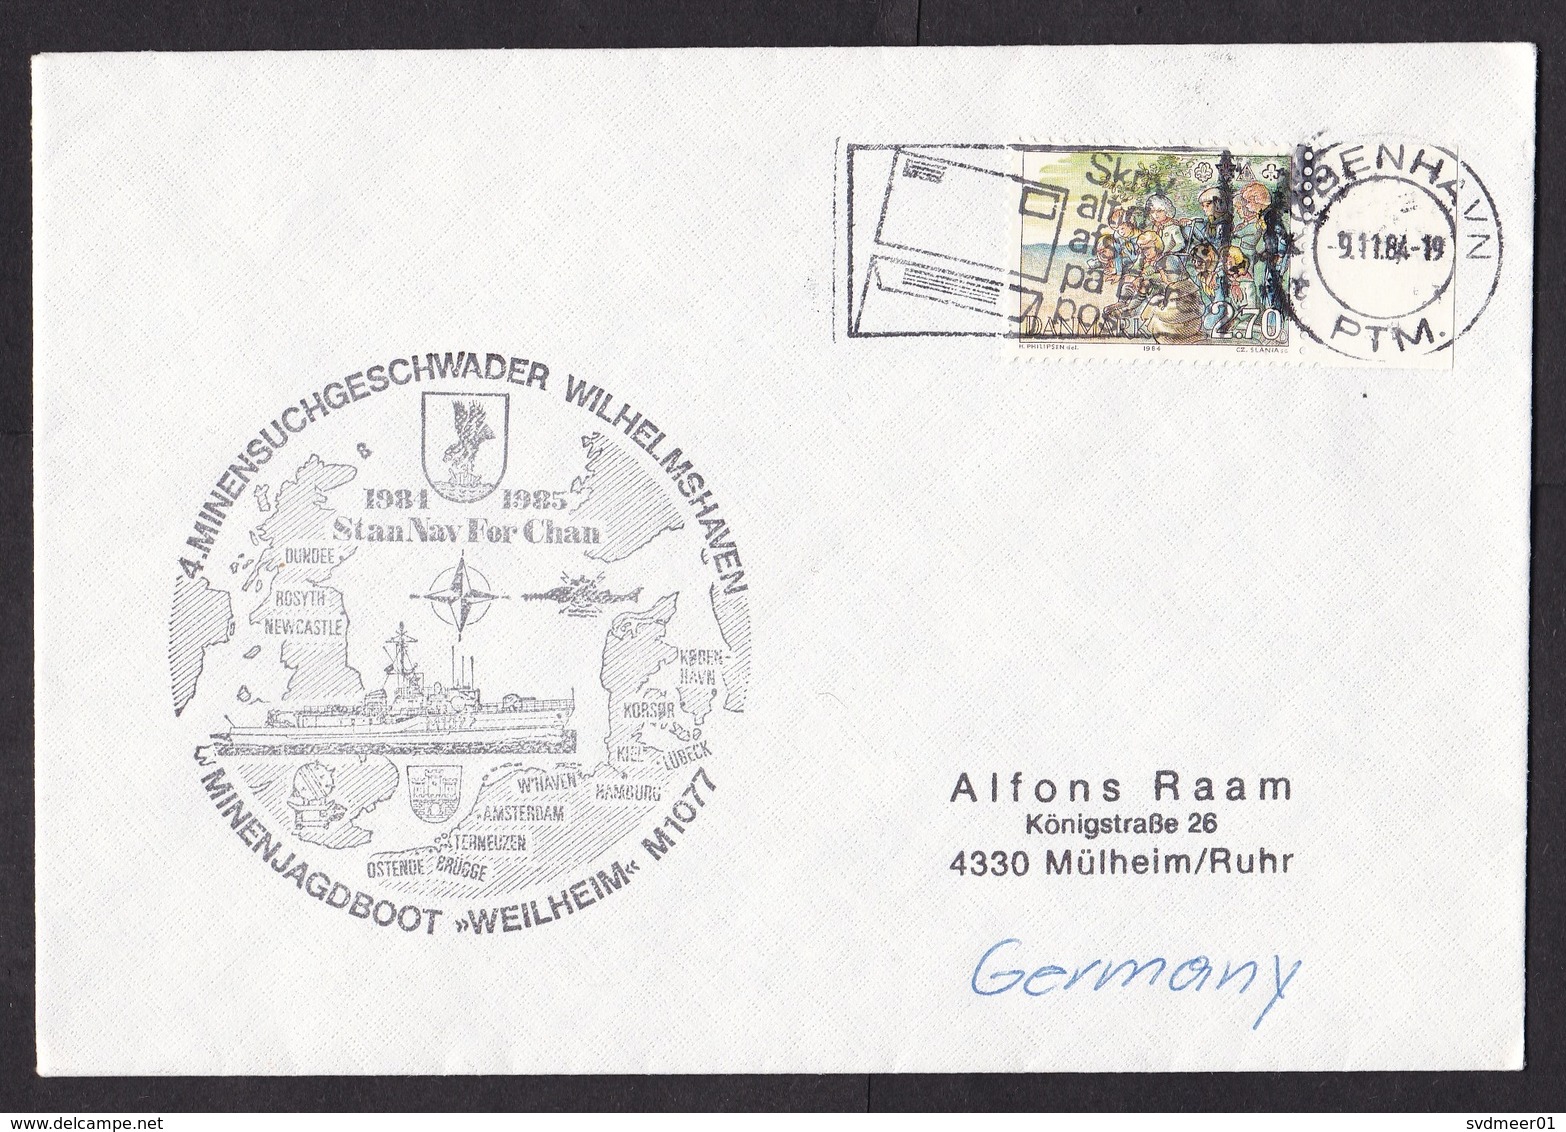 Denmark: Cover To Germany, 1984, 1 Stamp, Cancel NATO Stanavforchan, German Navy Vessel, Military (traces Of Use) - Brieven En Documenten